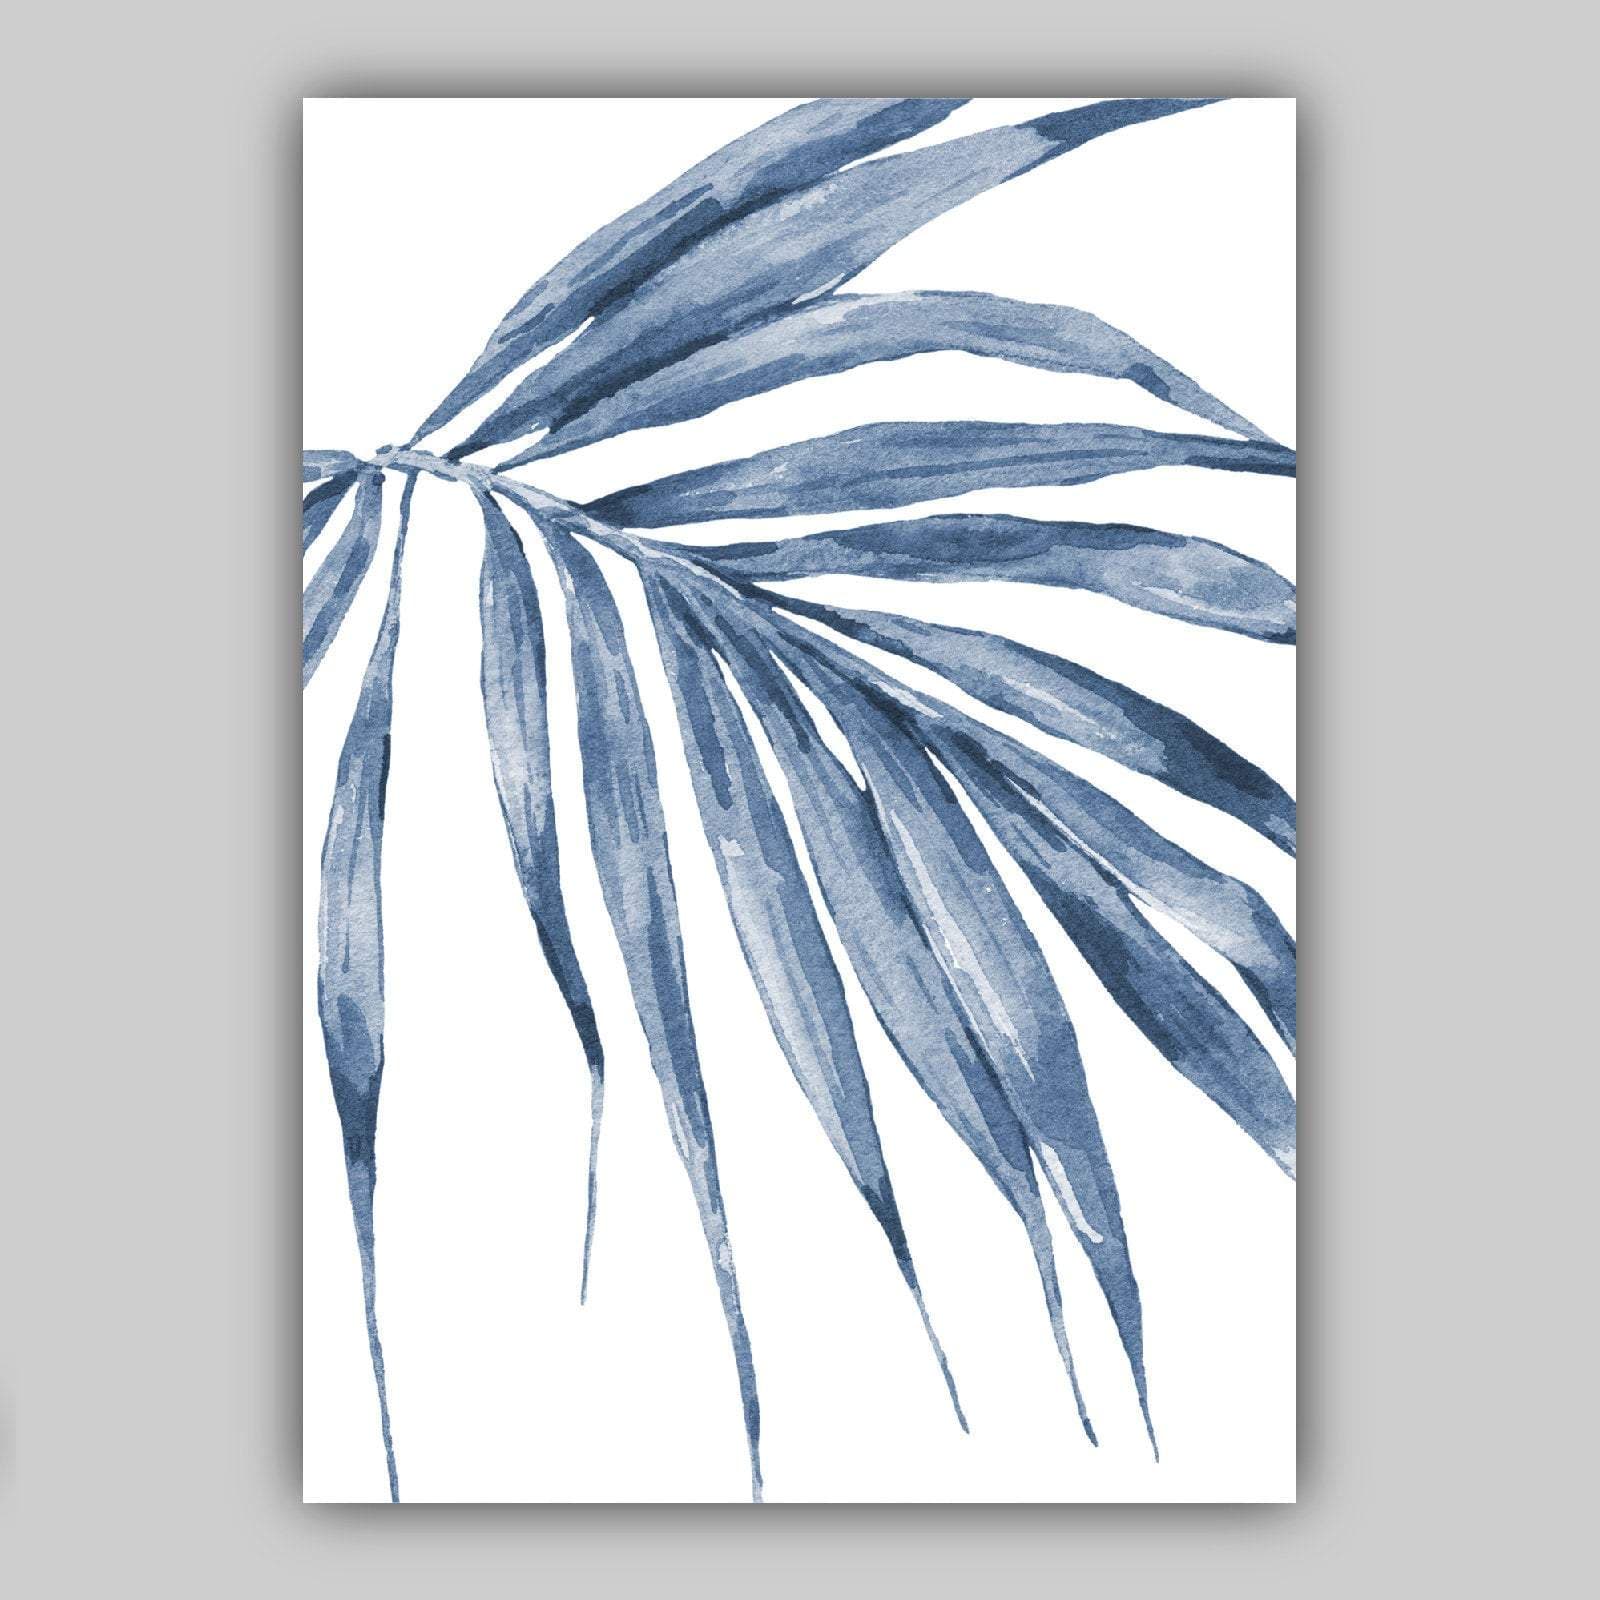 BOTANICAL set of 3 Navy Blue art PRINTS from Original Watercolour Monstera Papyrus Fern painting artwork perfect gallery pictures wall